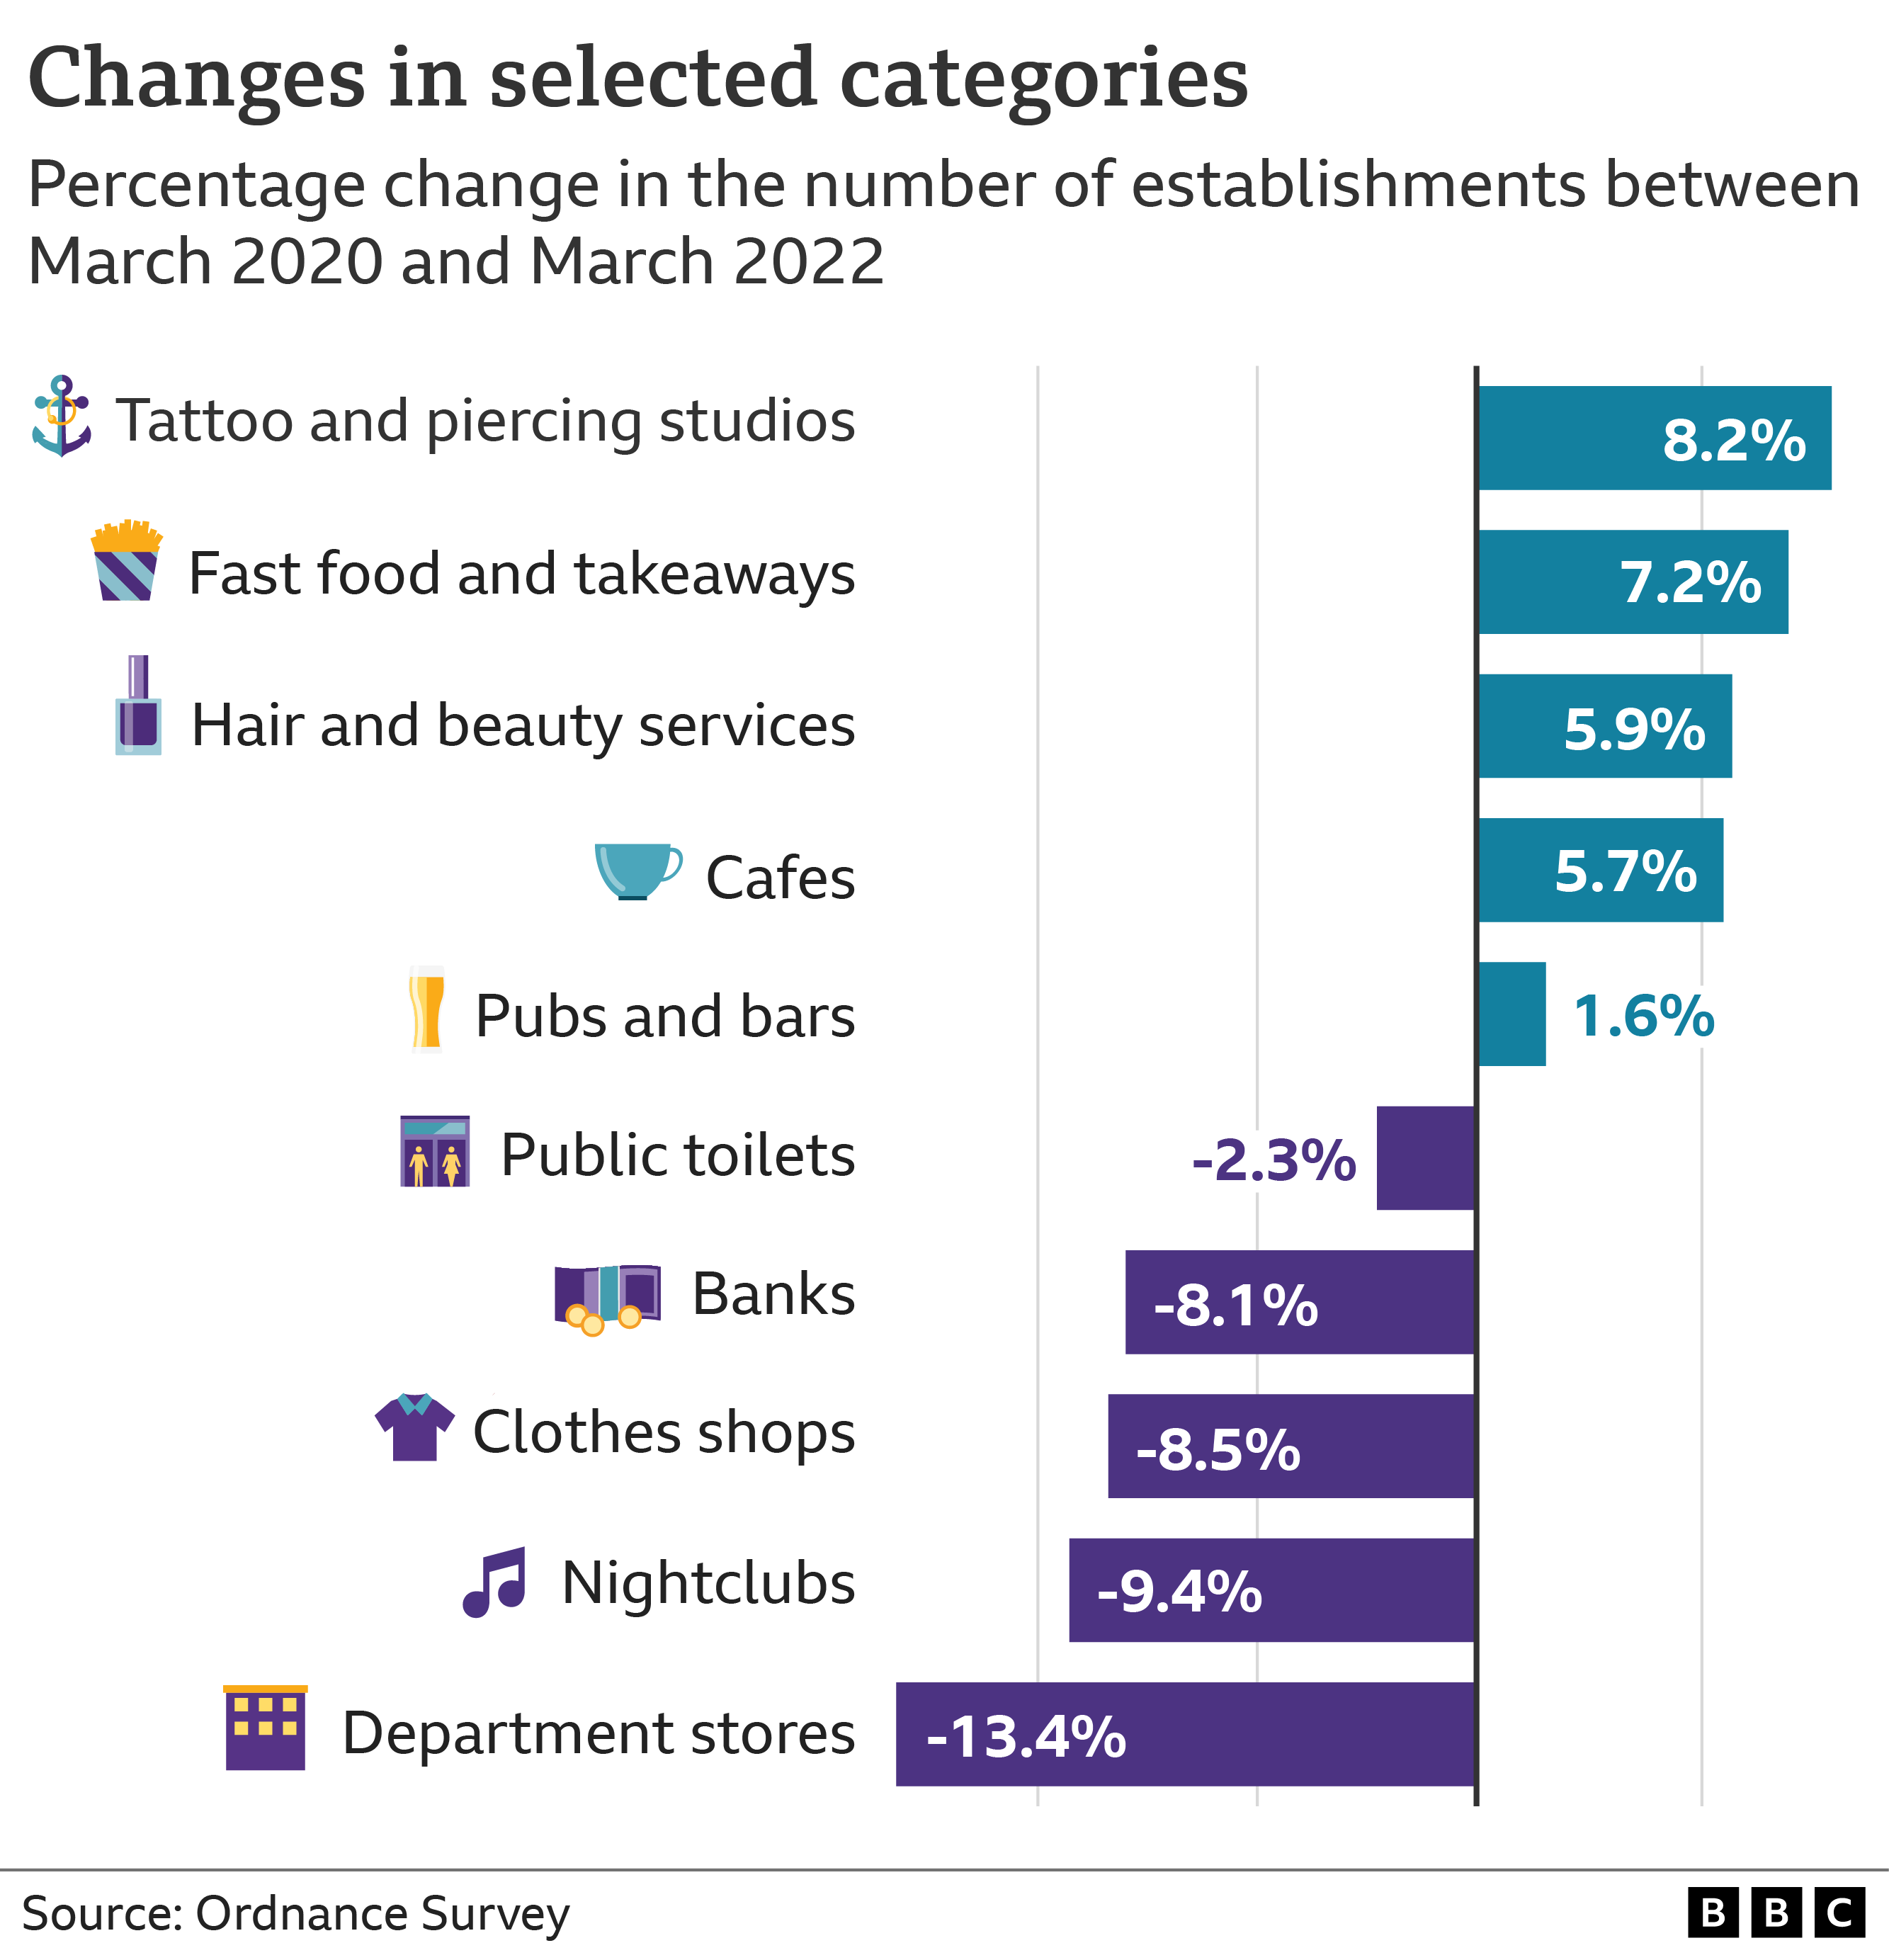 A chart showing the change in different categories from March 2020 to March 2022 in Great Britain. Tattoo and piercing studios have shown the biggest increase with an 8/2% rise, with fast food and takeaways below on 7.2%. Nightclubs are down 9.4% and department stores fell by 13.4%